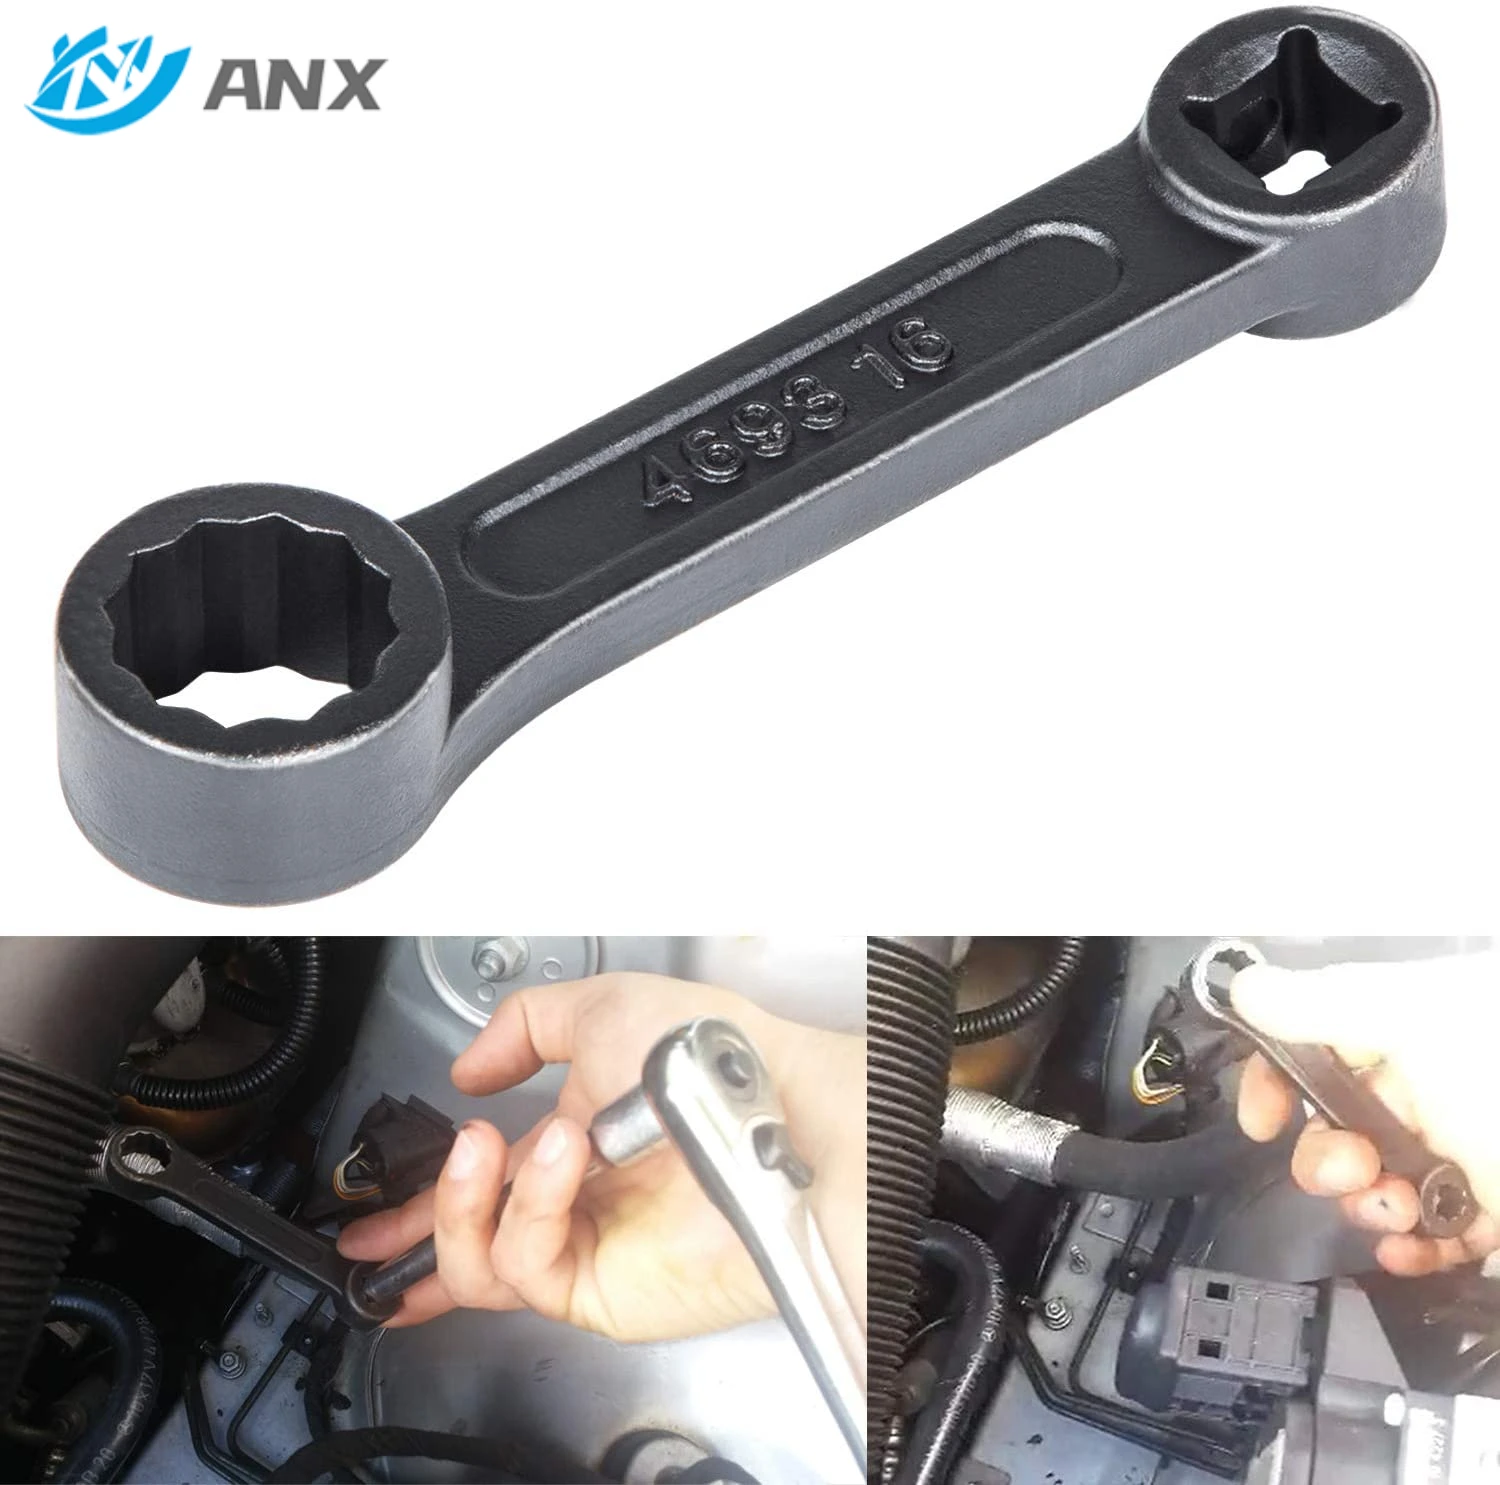 ANX Offset 16mm 4693 Engine Mount Socket Wrench for Mercedes Benz W220/ W210/W203/W221/W211/W204 anx rocker arm shaft socket for detroit diesel 60 engine series for j 44706 12mm 12pt 1 2 inch drive extra deep socket